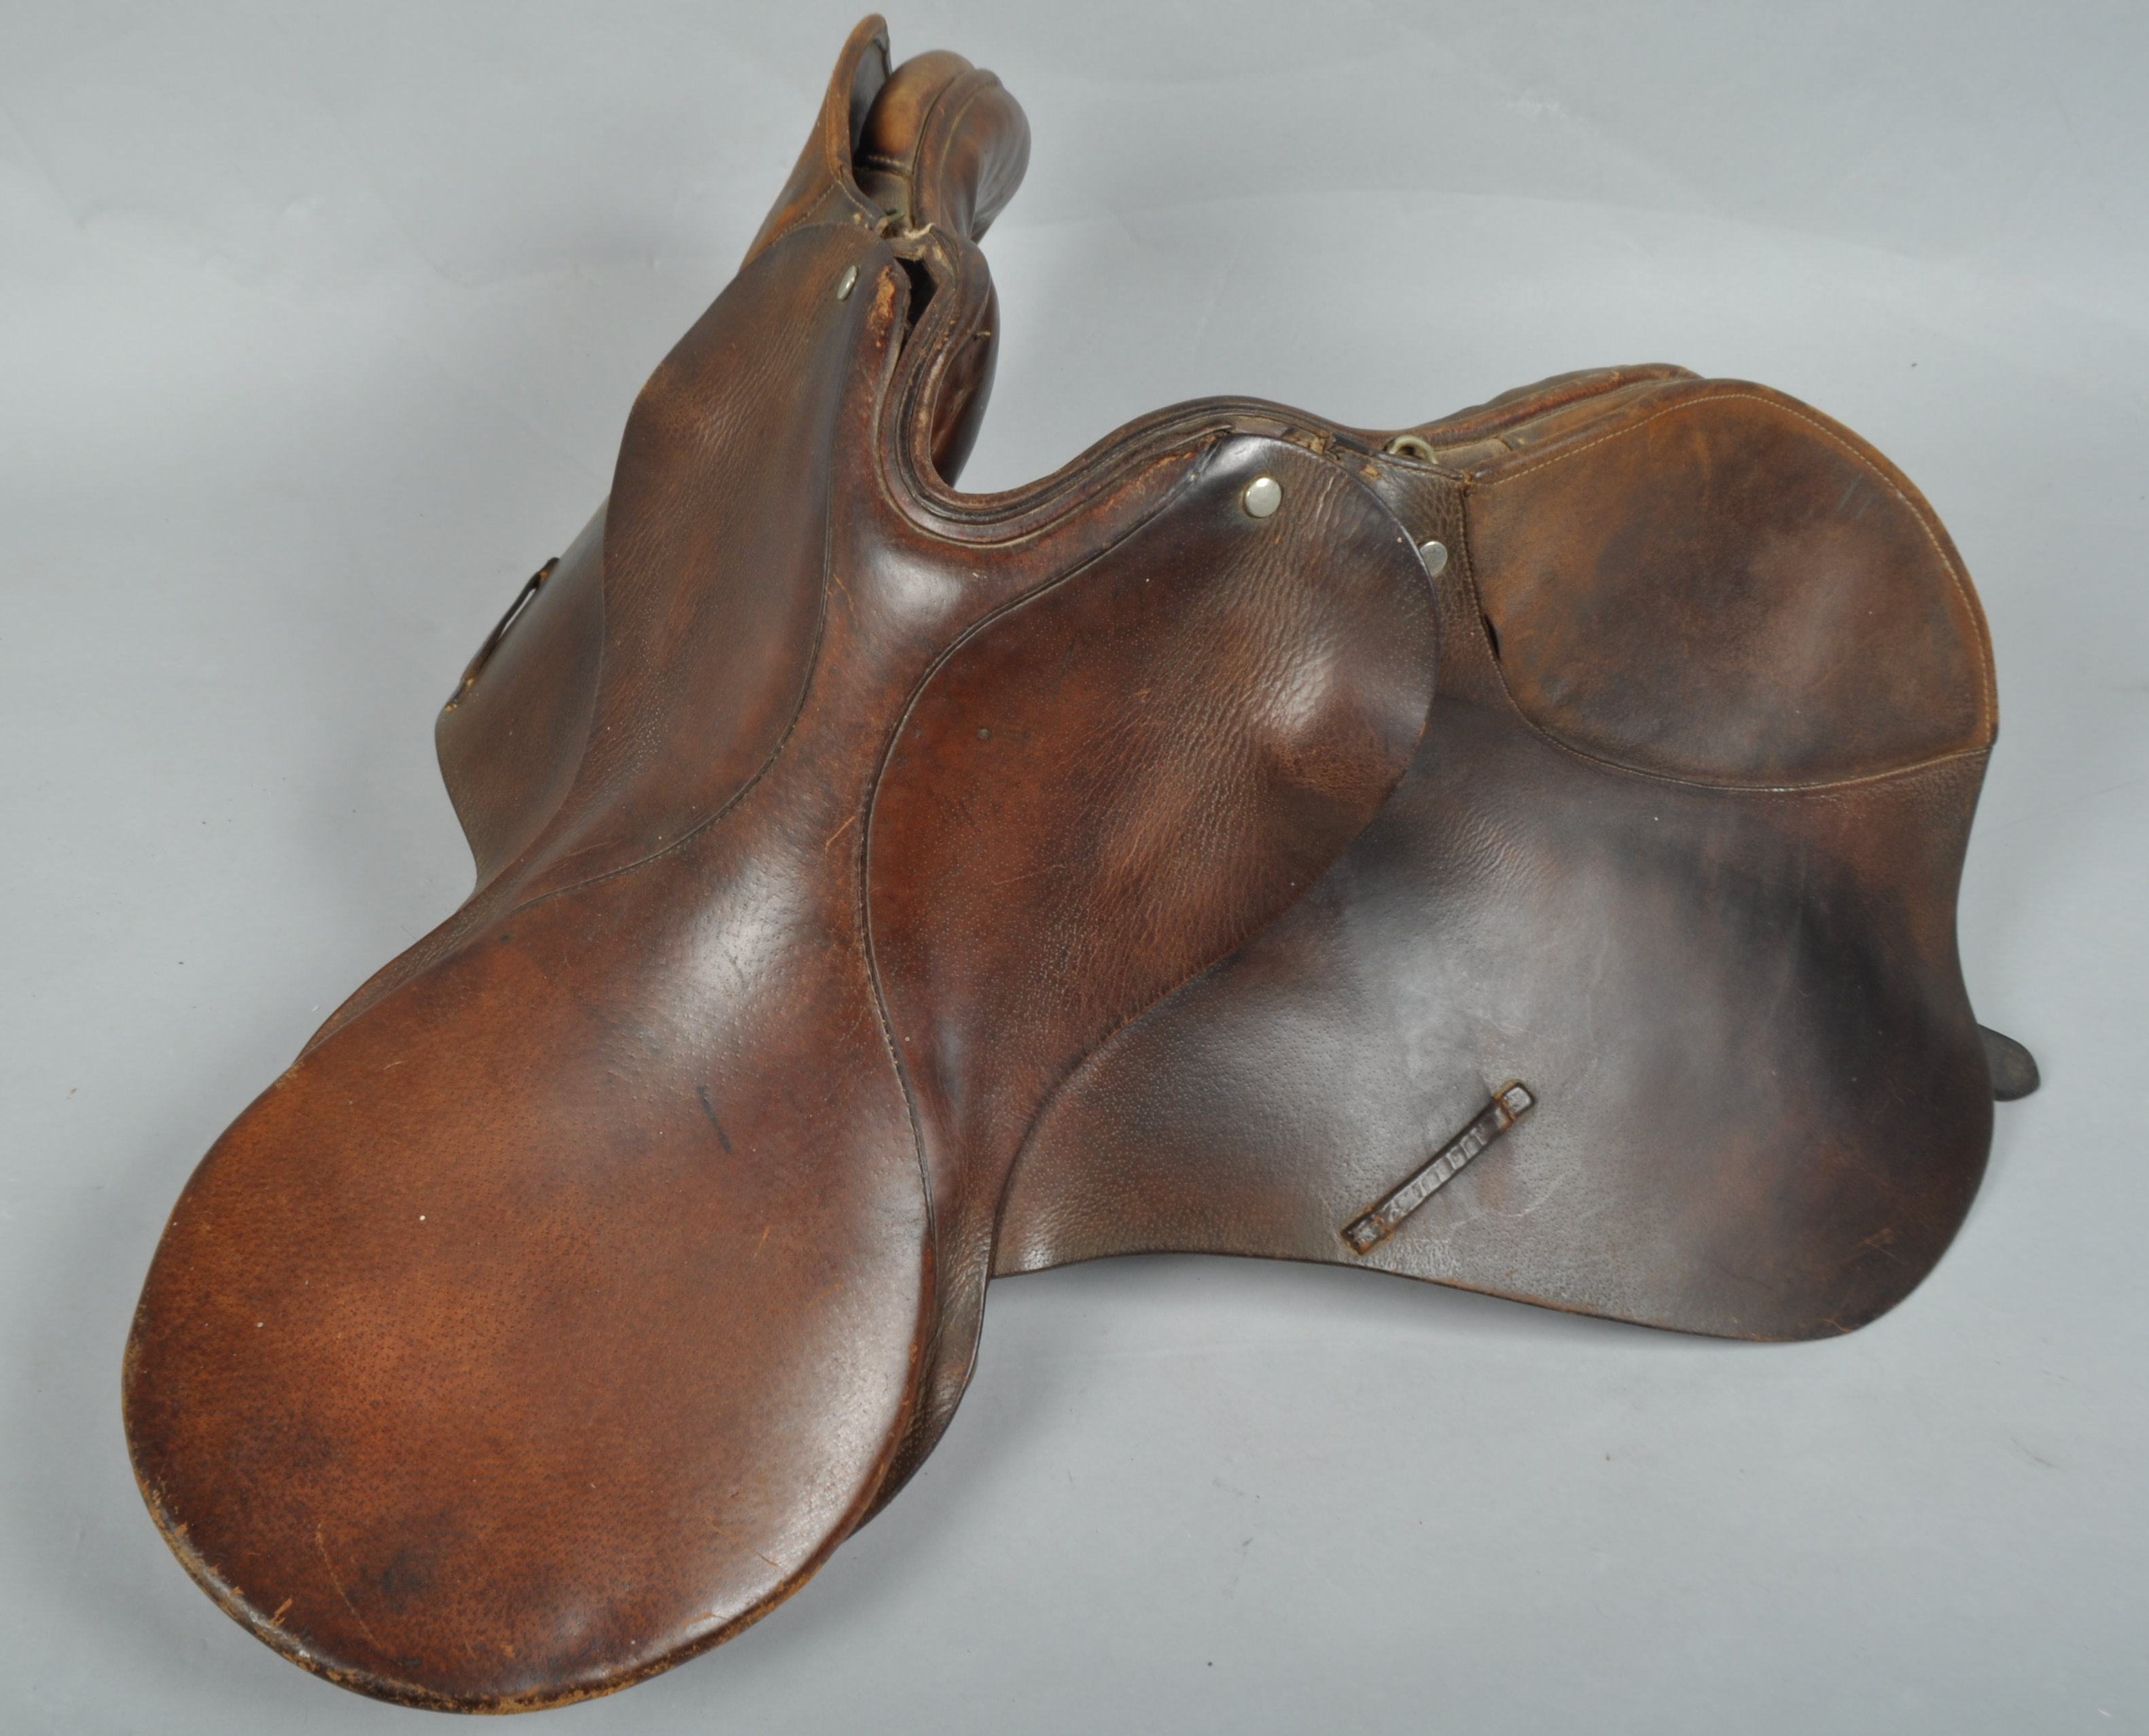 A brown leather saddle general purpose saddle from D ring to D ring 23cm the seat 42cm long